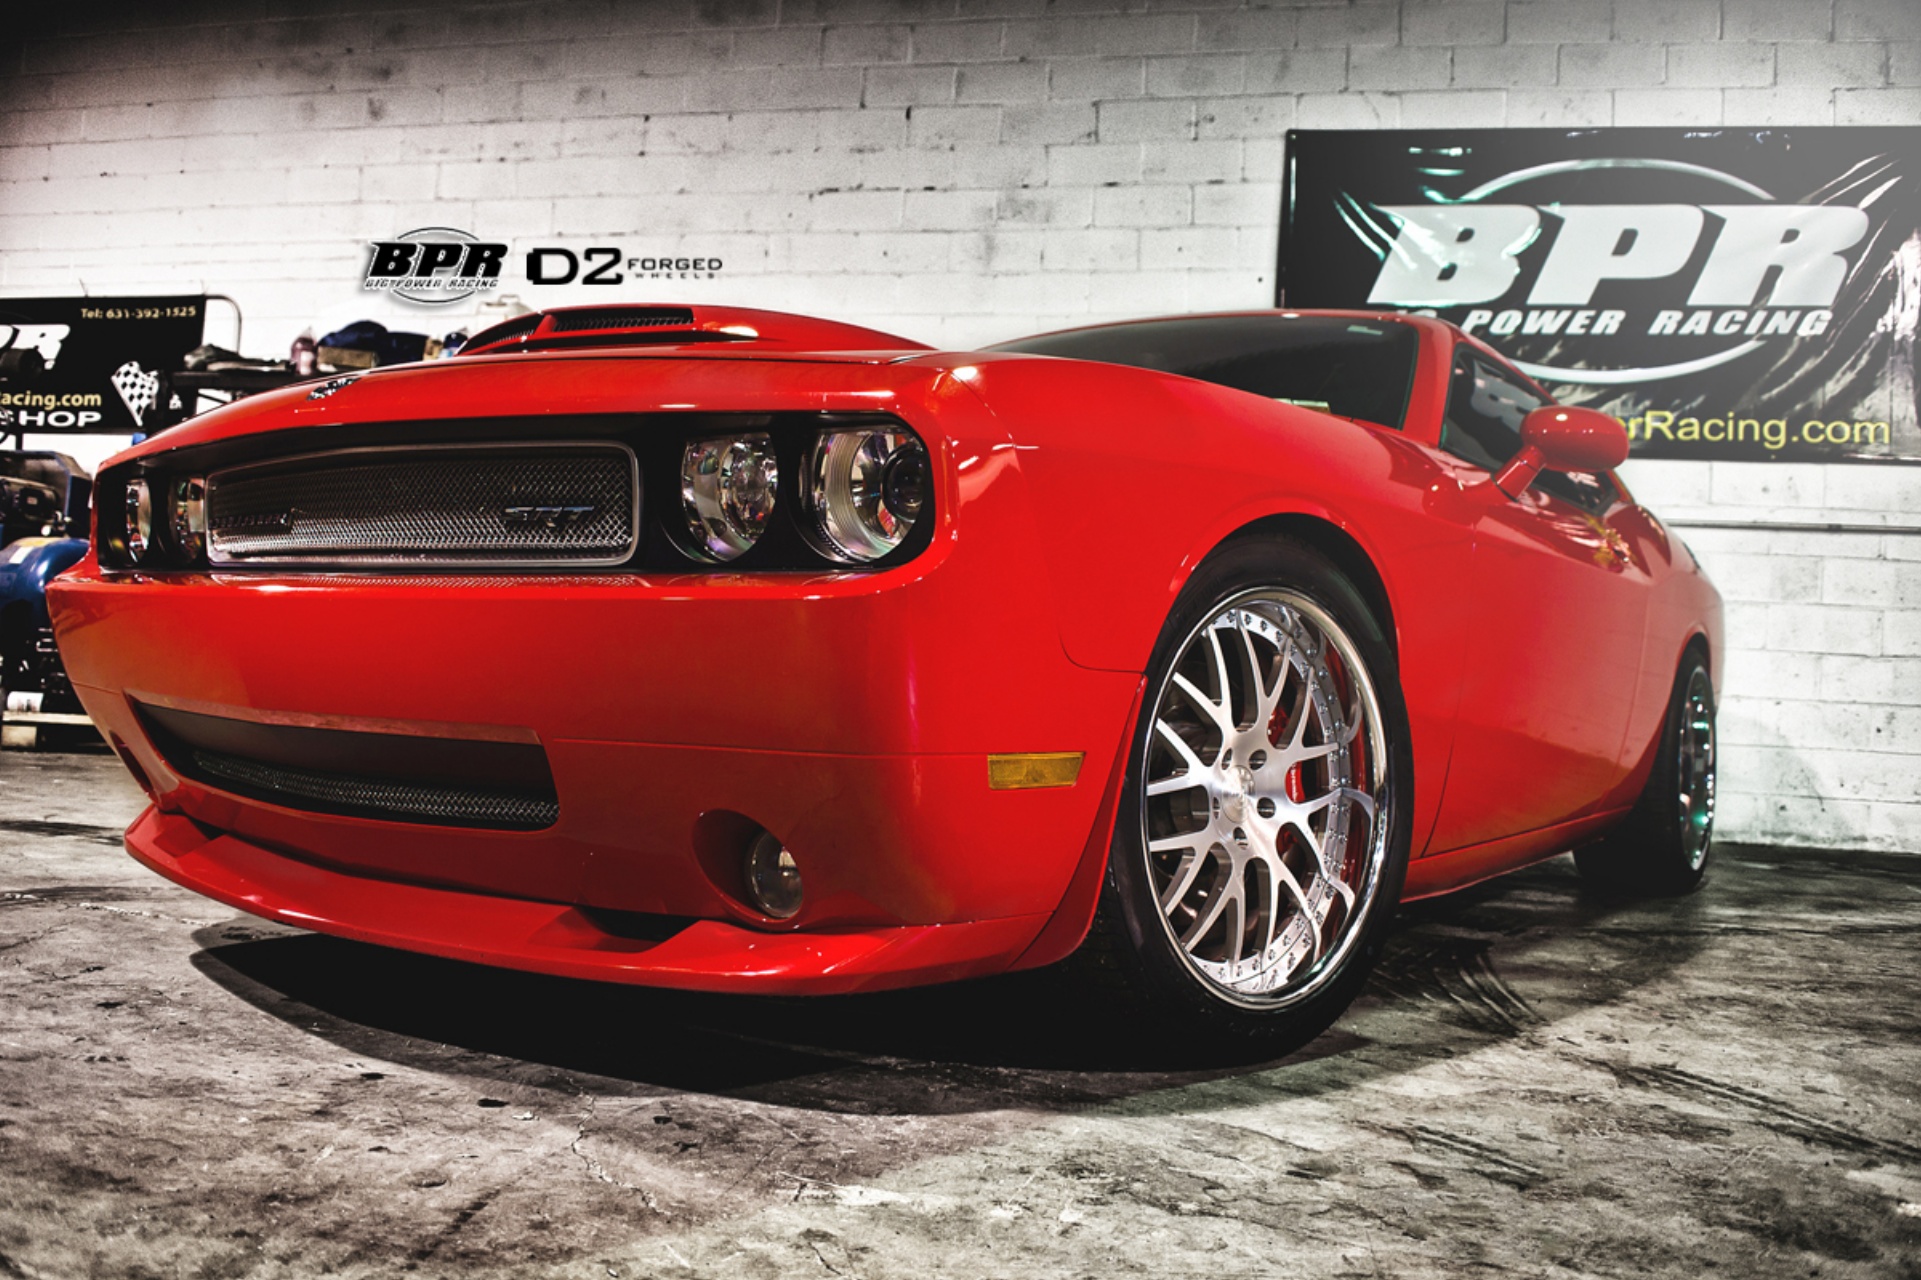 2012, D2forged, Dodge, Challenger, Srt8, Tuning, Muscle, Hot, Rod, Rods Wallpaper